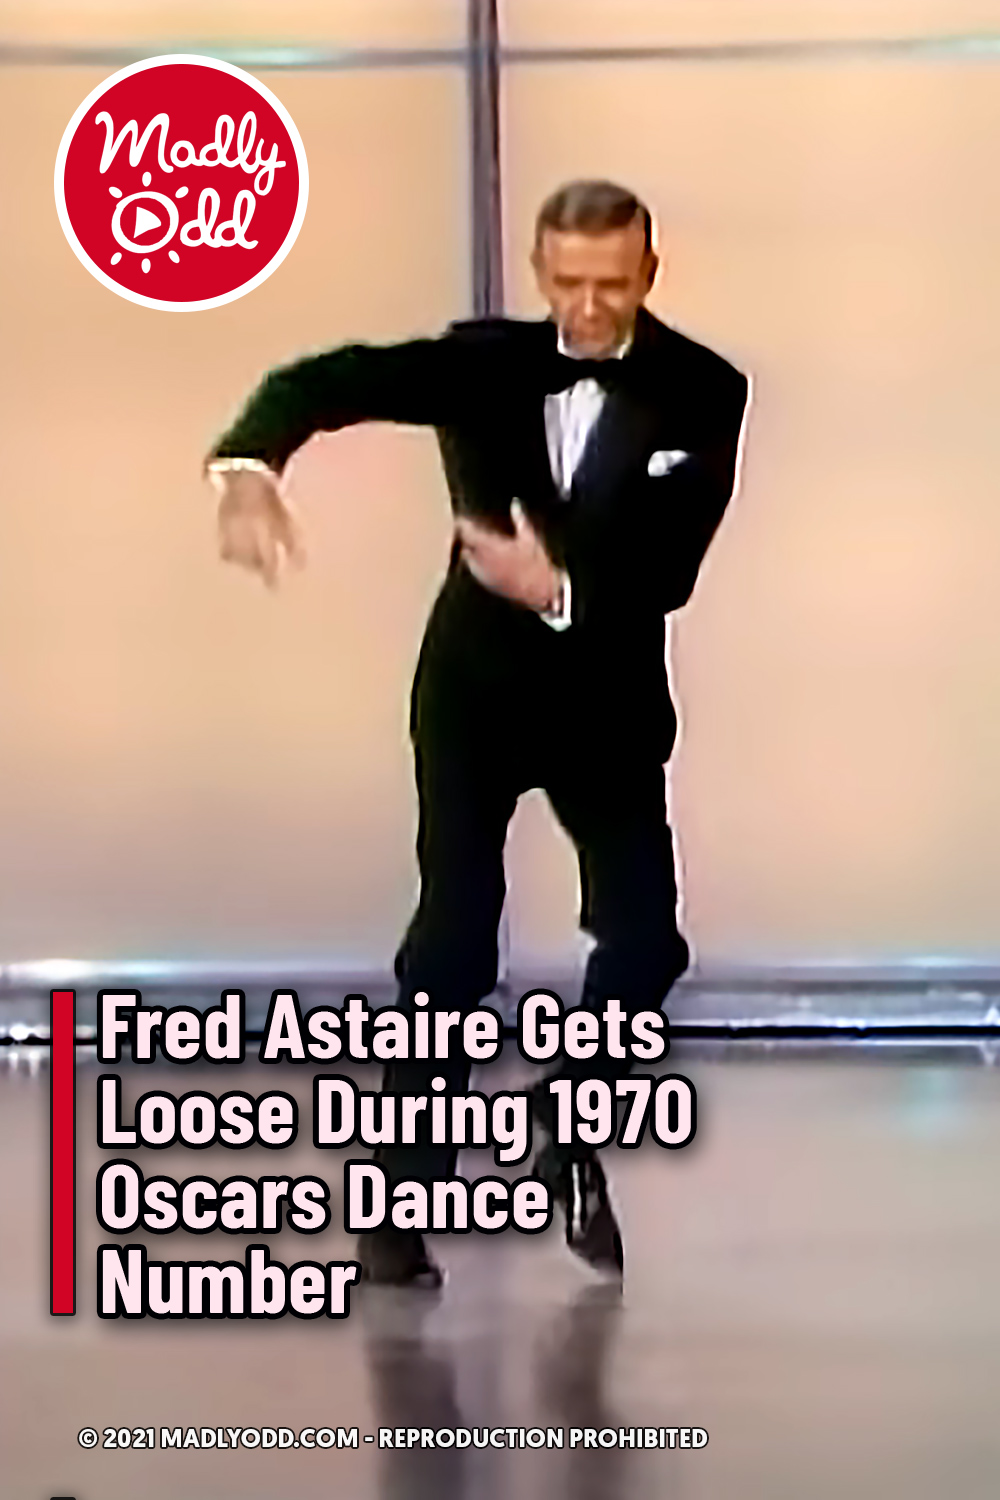 Fred Astaire Gets Loose During 1970 Oscars Dance Number